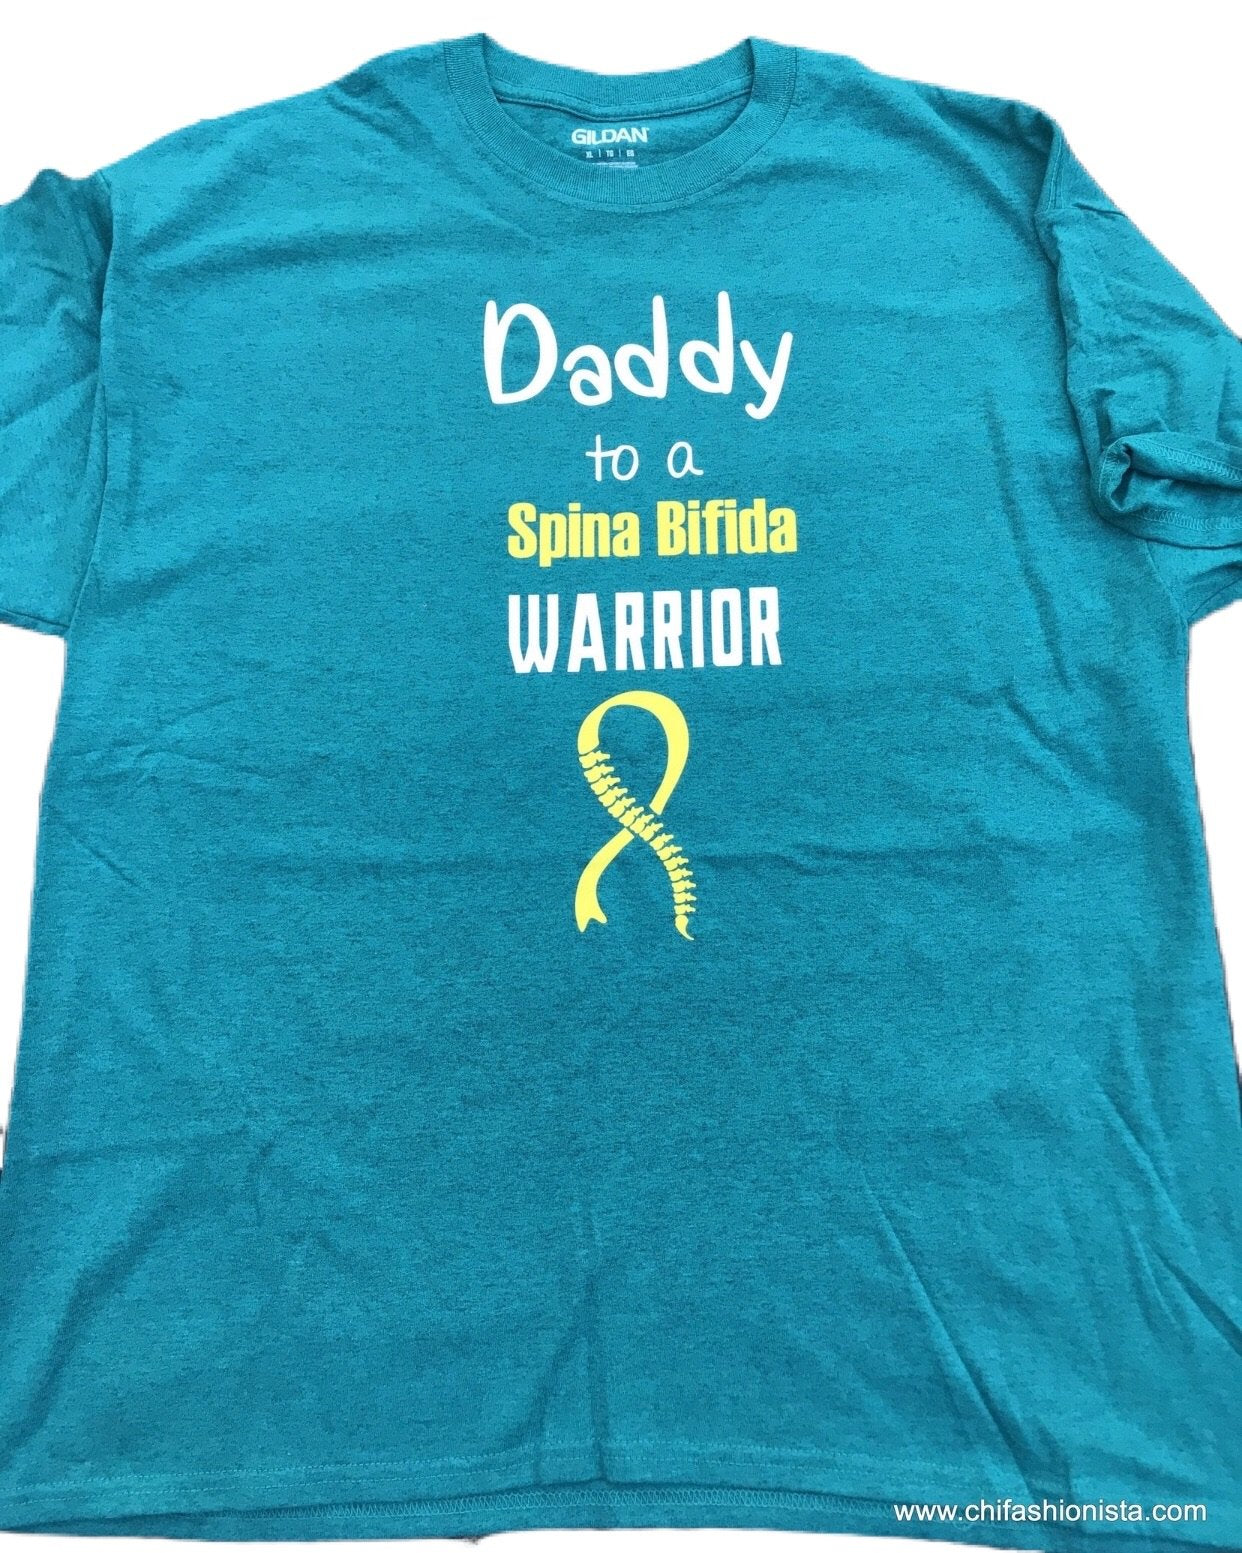 Mama to a Spina Bifida Warrior (Other Names available)